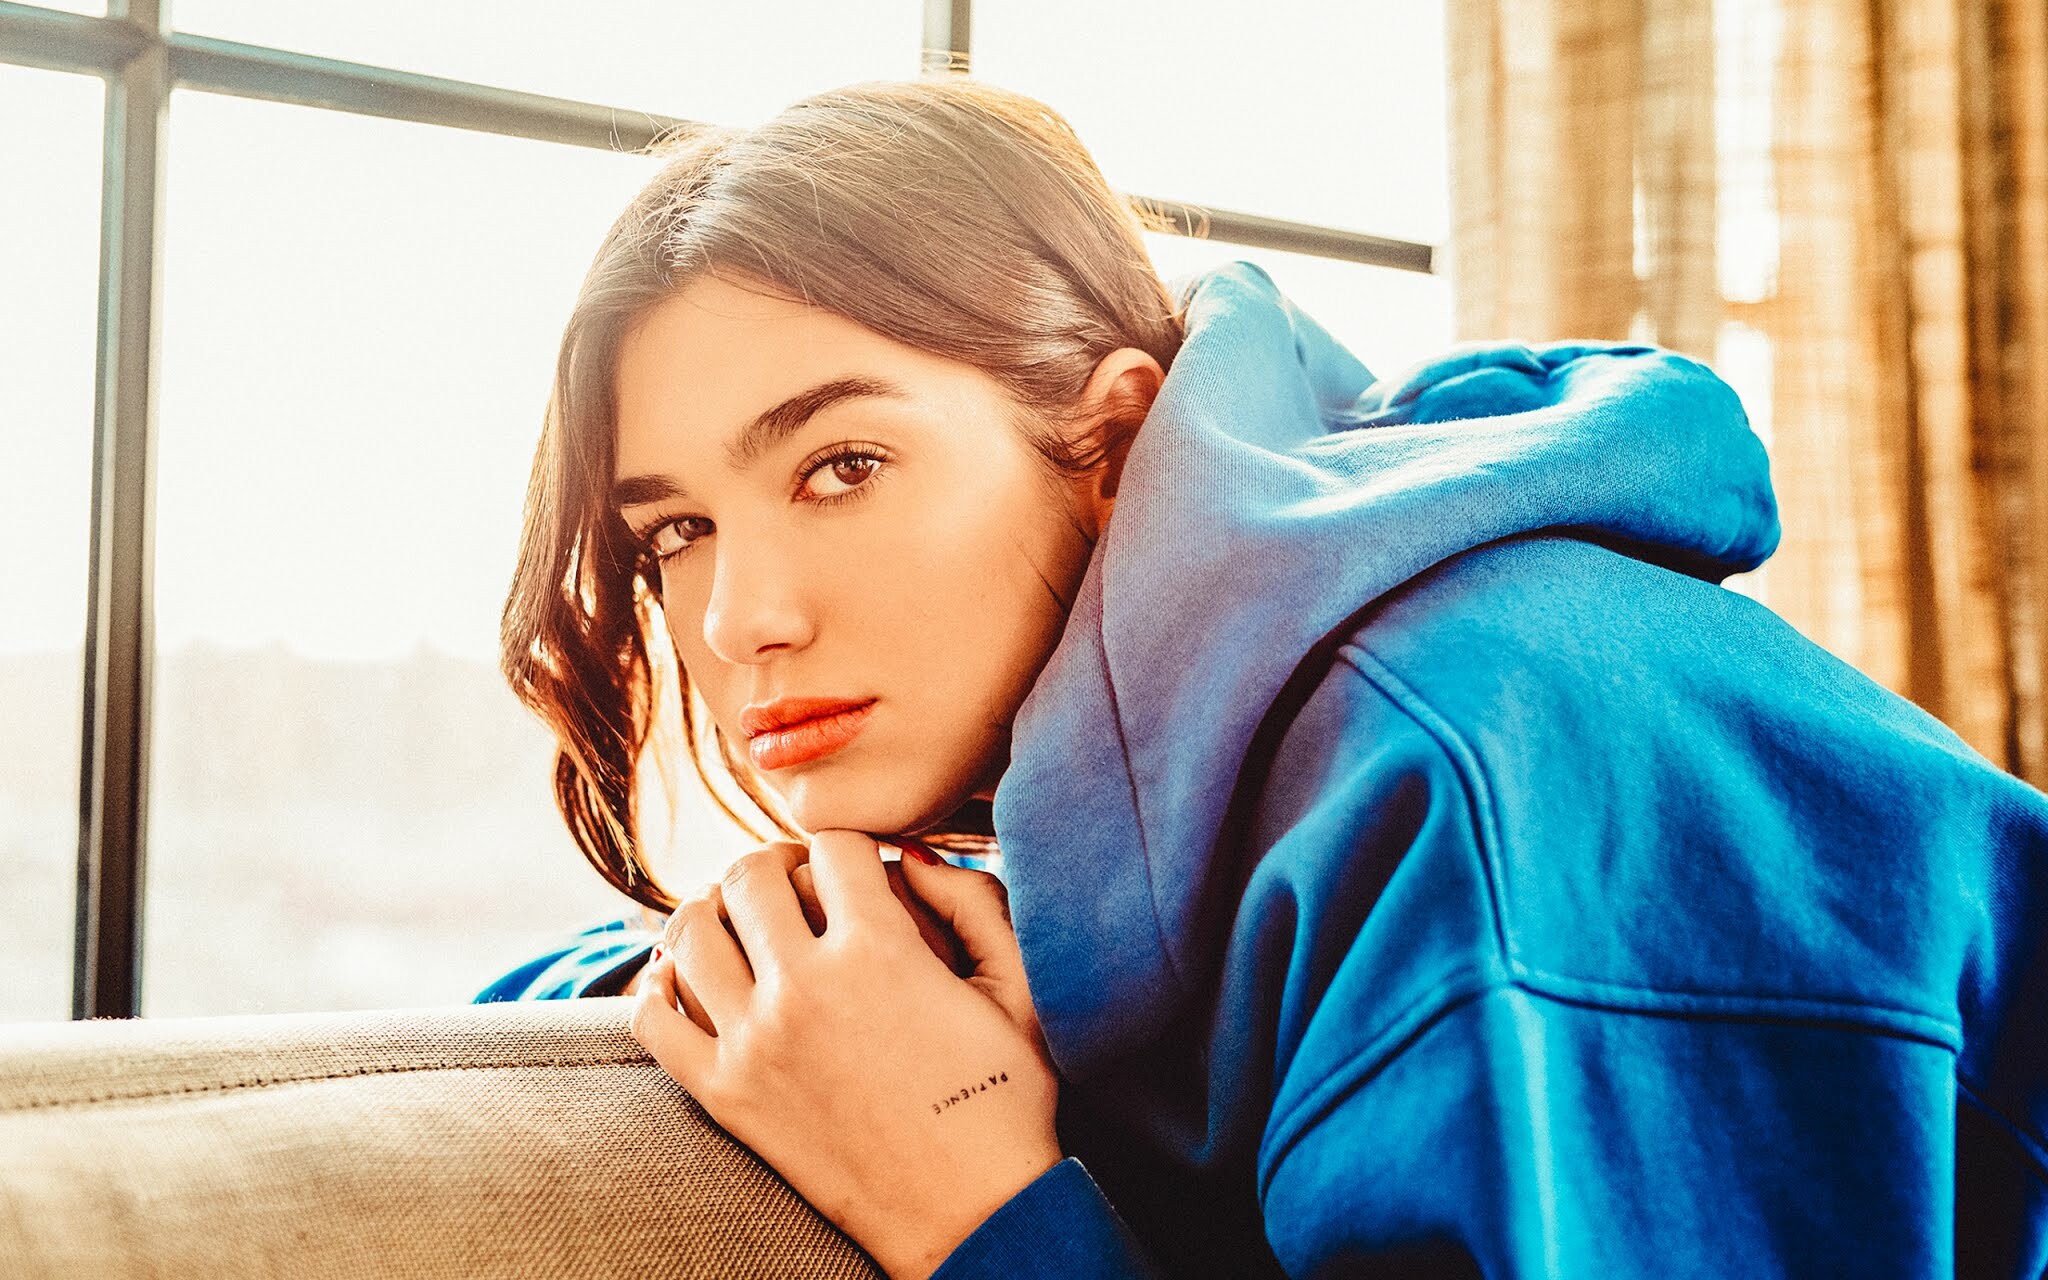 Dua Lipa: "New Rules" was the first single by a female solo artist to reach the top in the UK since Adele's "Hello". 2050x1280 HD Wallpaper.